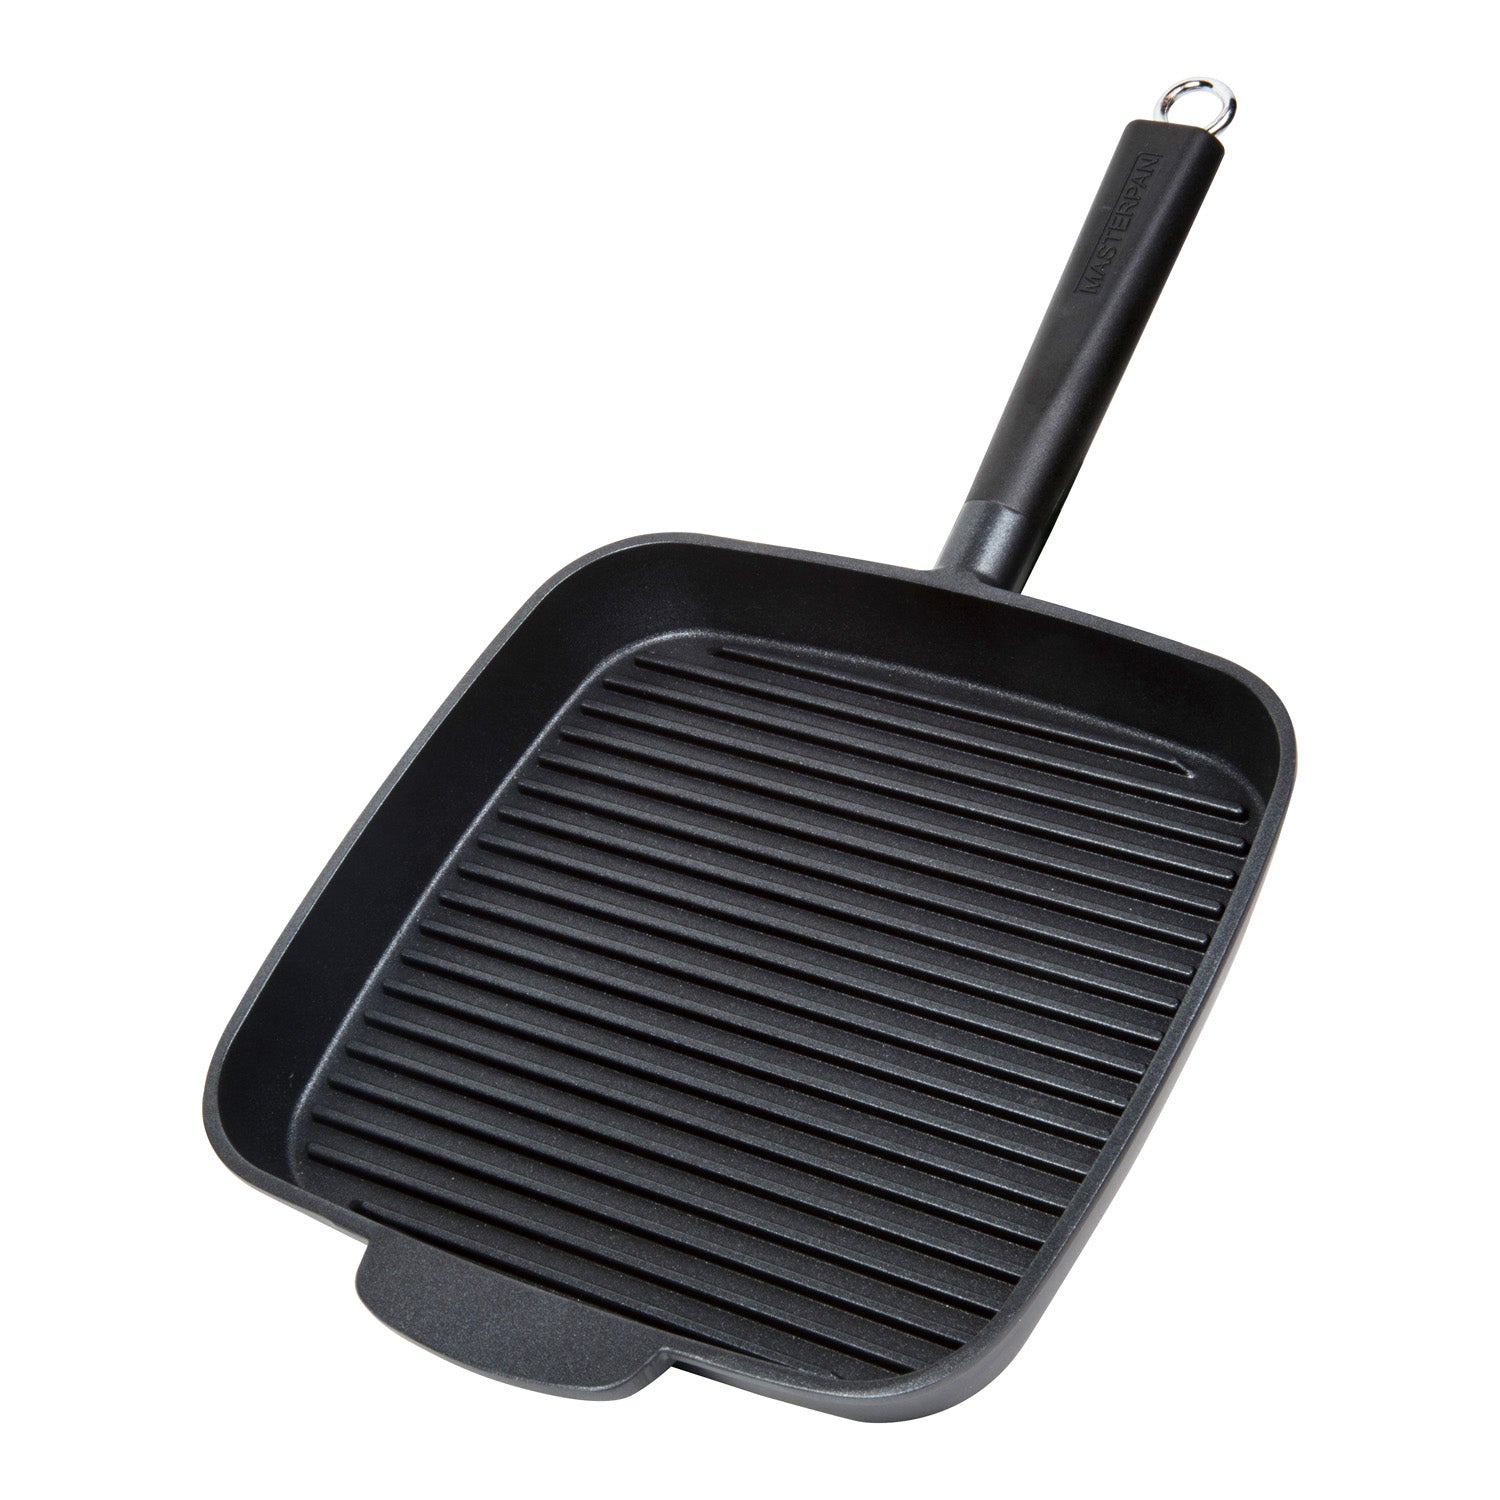 HEIMP Breakfast Frying Pan Divided Frying Grill Pan 3 Section Skillet  Nonstick Egg Frying Pan Induction Compatible for Breakfast Burger Egg Bacon frying  pan